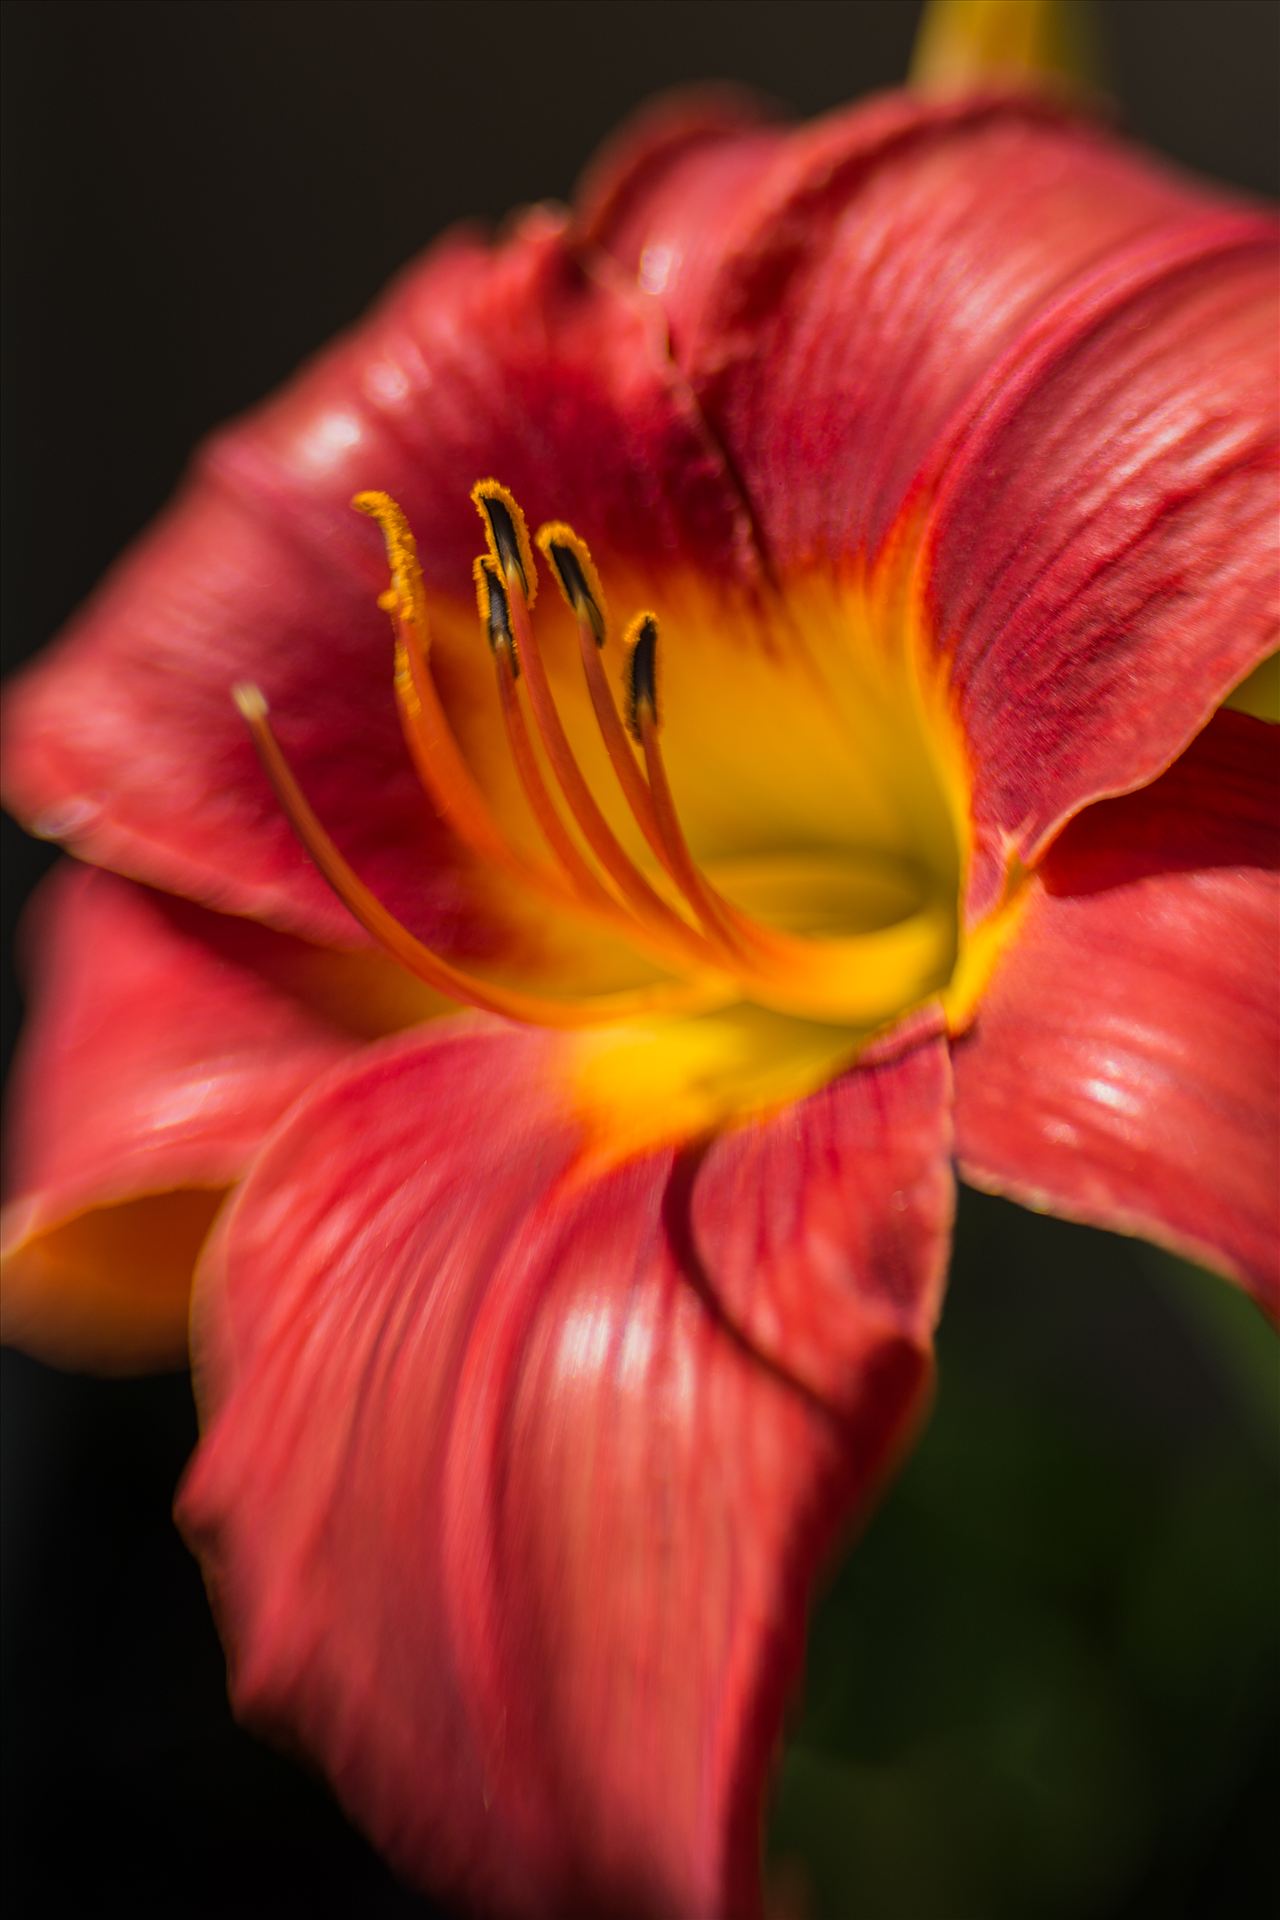 Wet Hawaiian Morning.jpg - Lily facing the sun with dark background by Sarah Williams